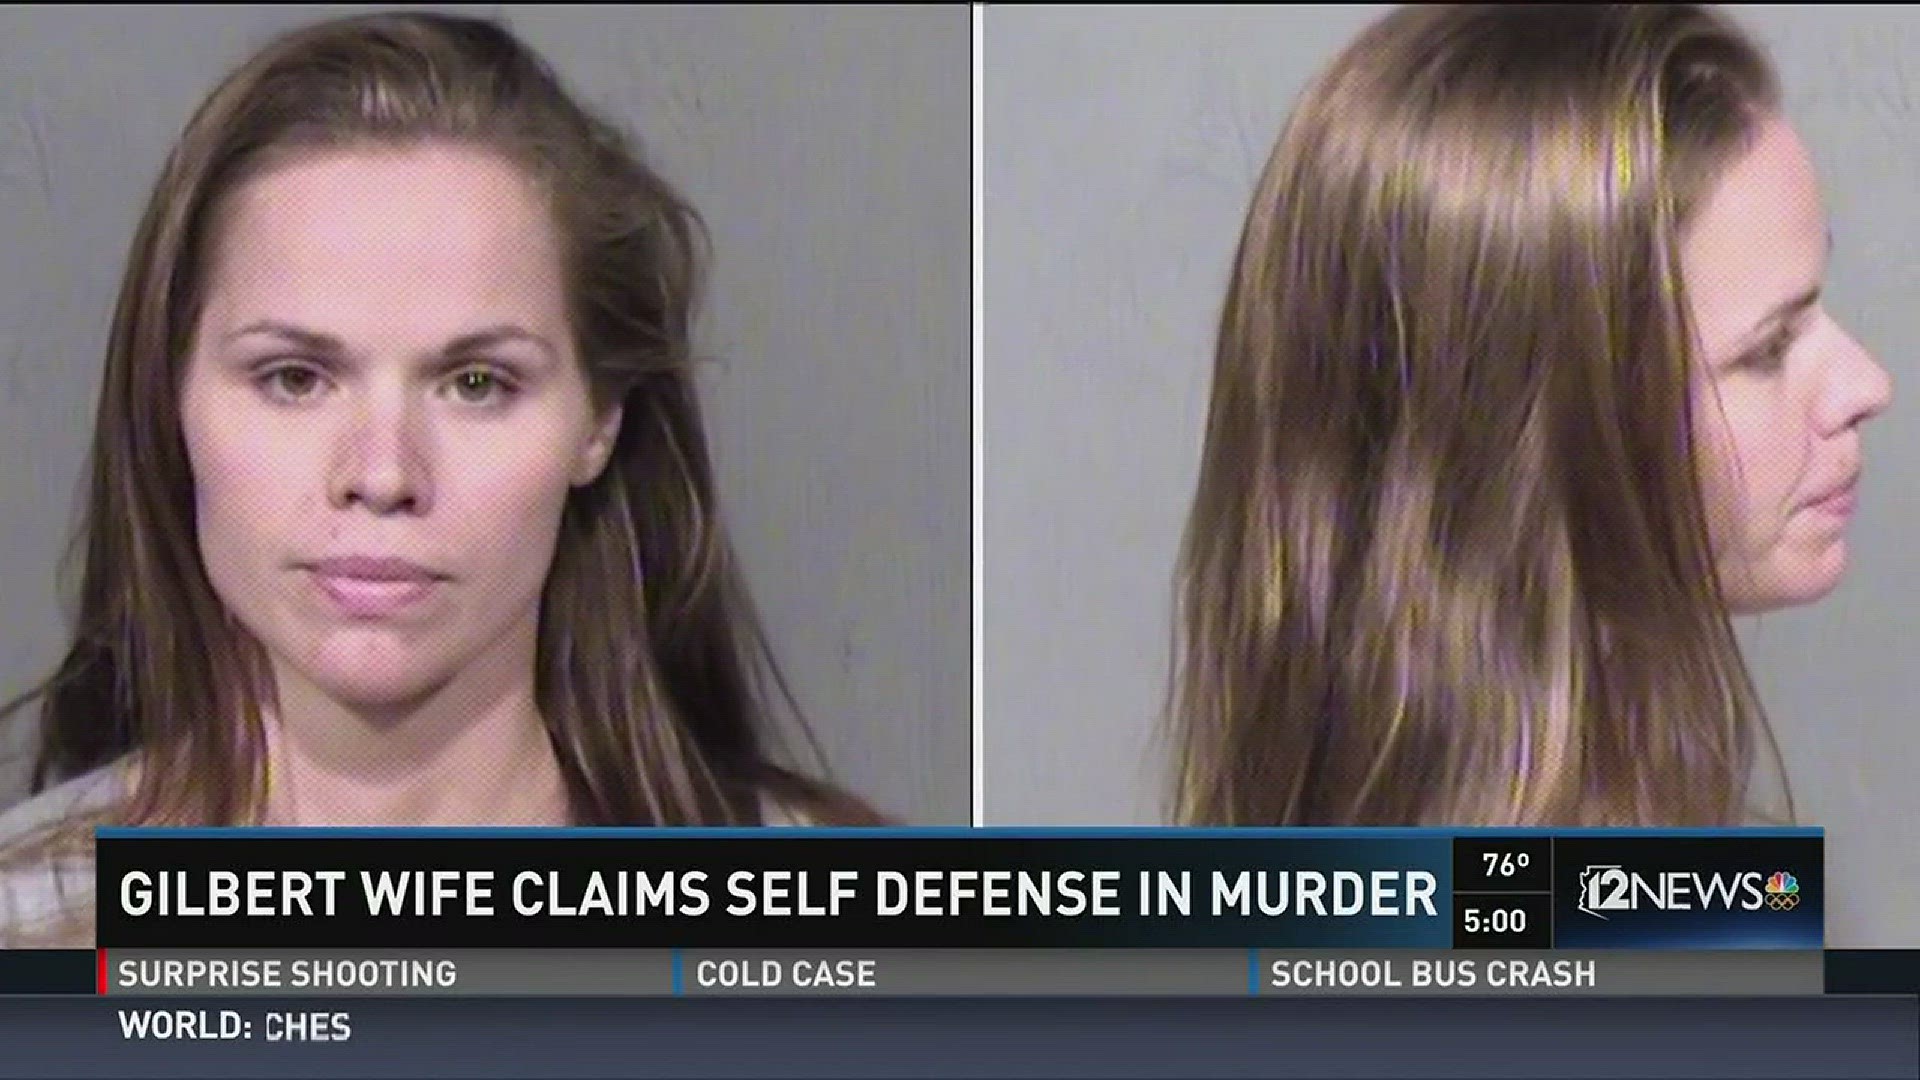 A 27-year-old woman being held on murder charges said she killed her husband in self defense